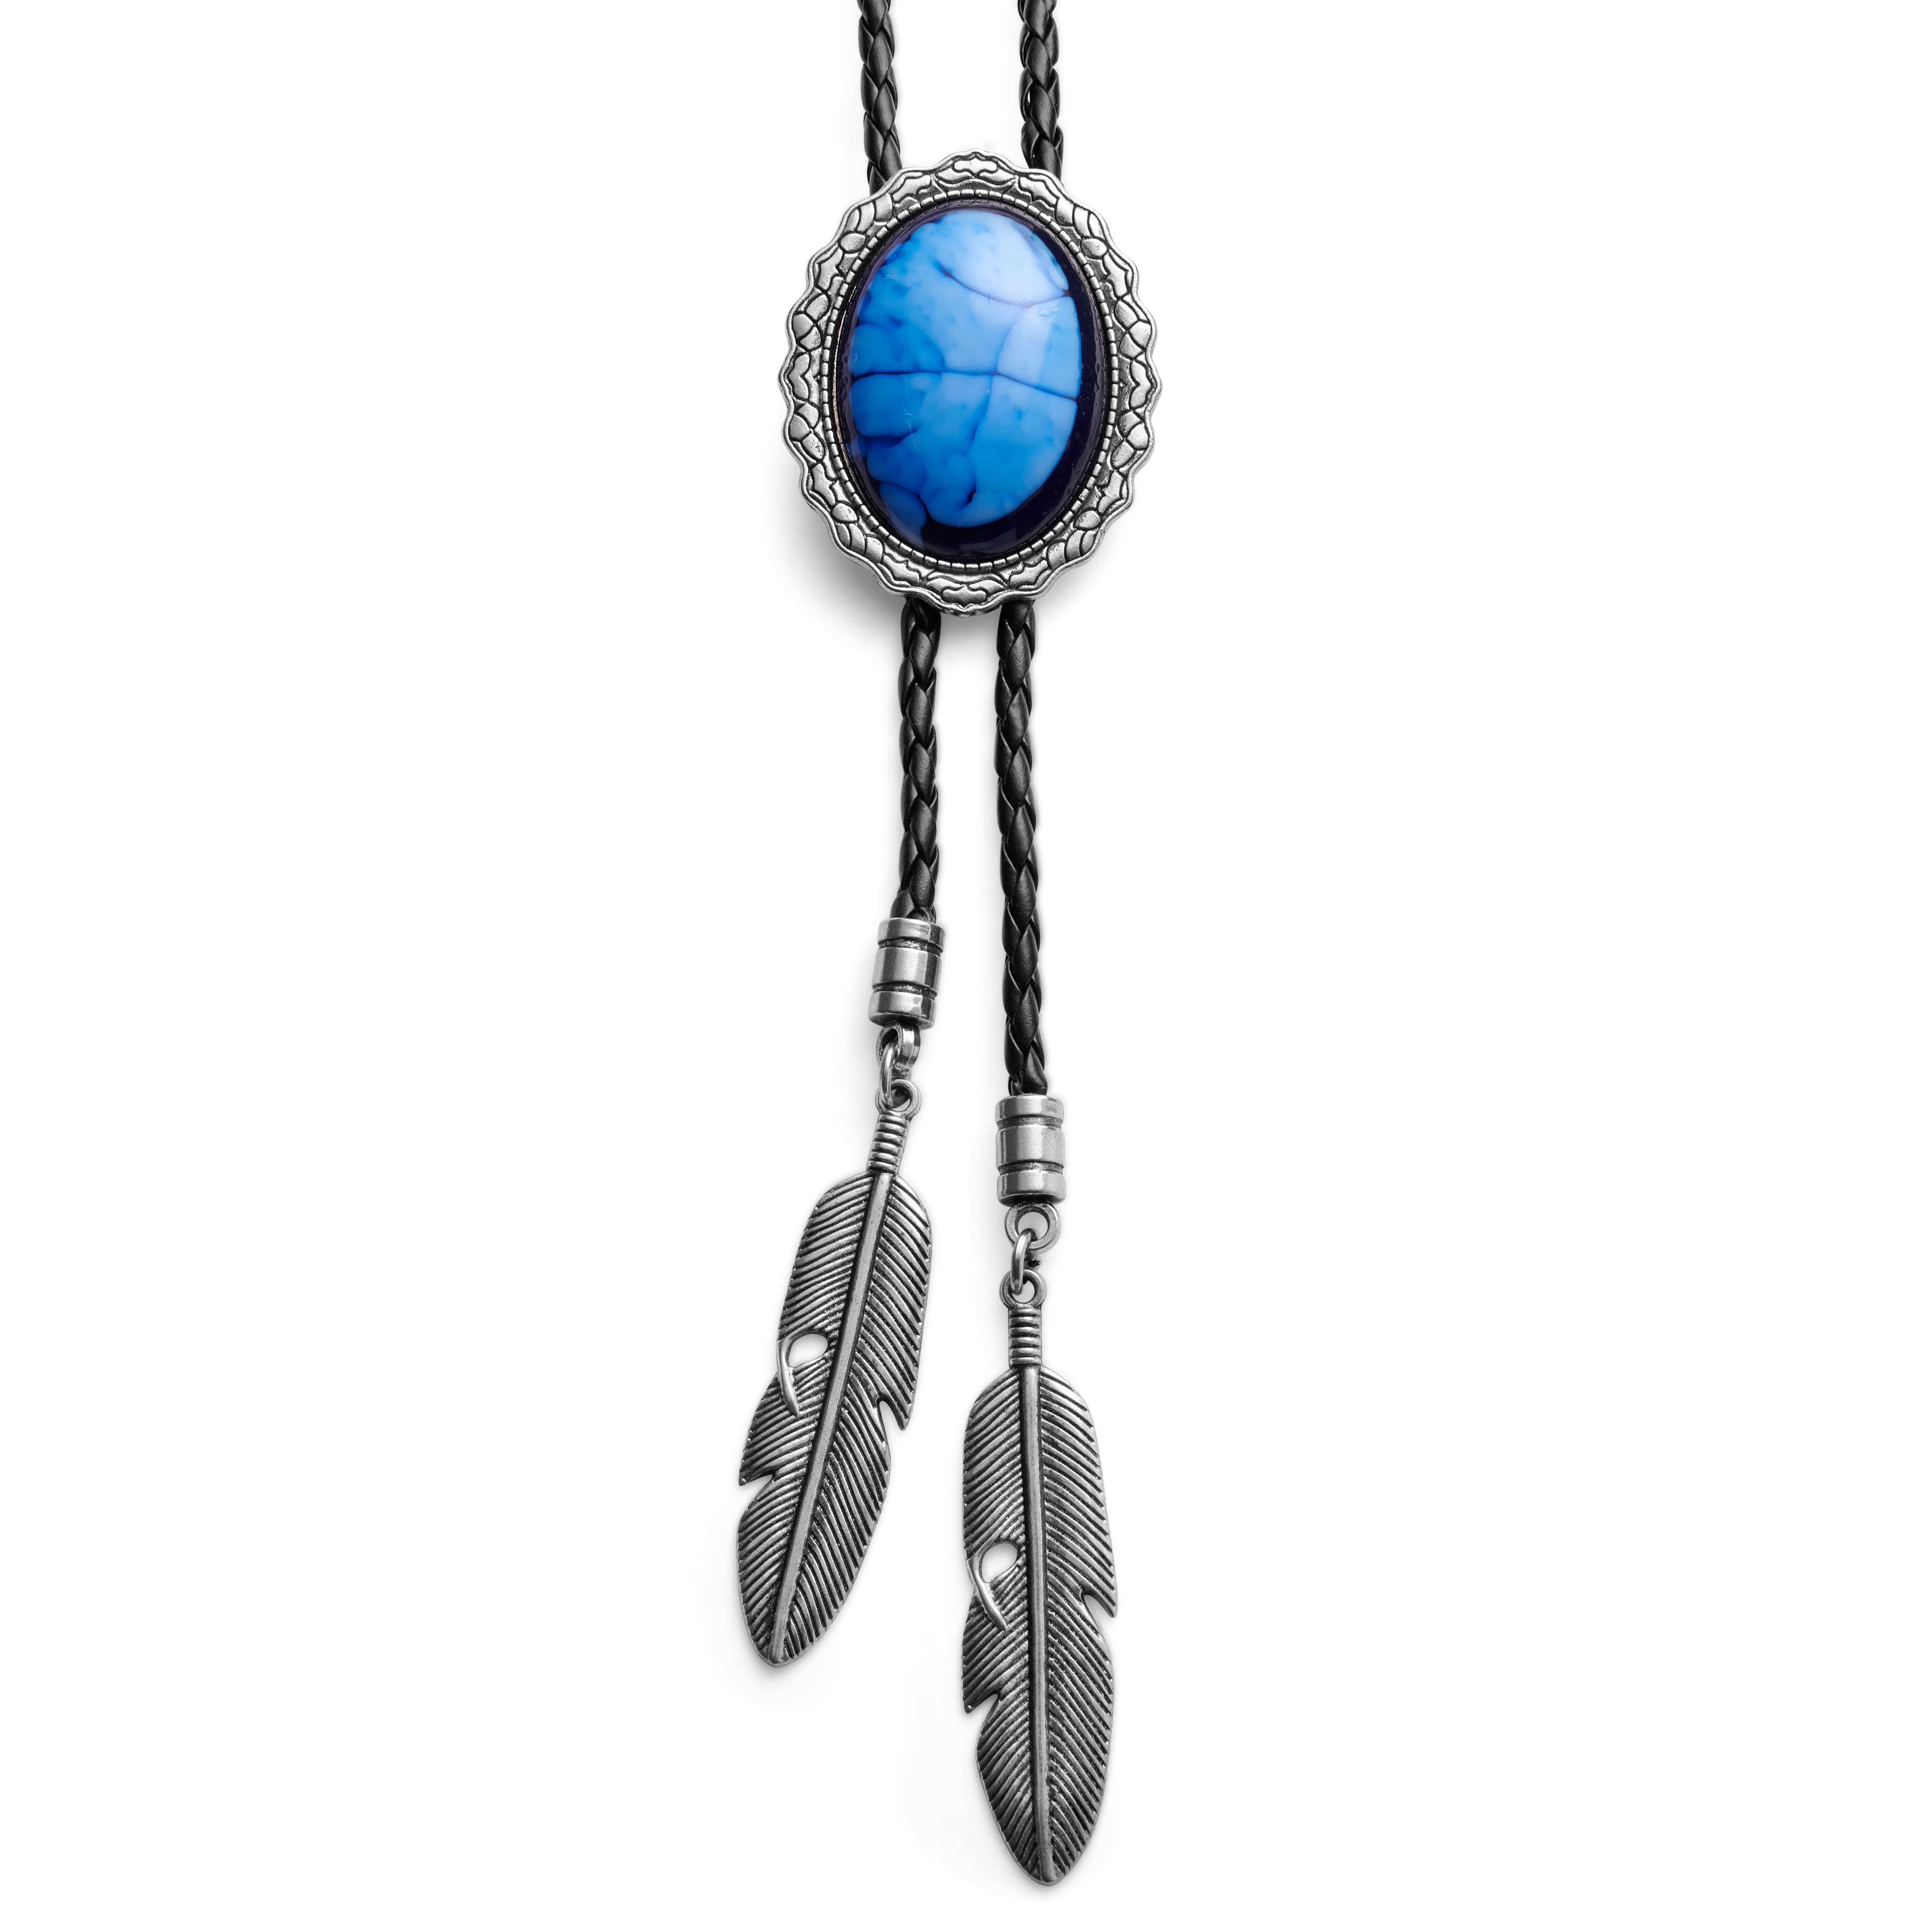 Blue Stone & Metal Feathers Adjustable Braided Leather Bolo Tie